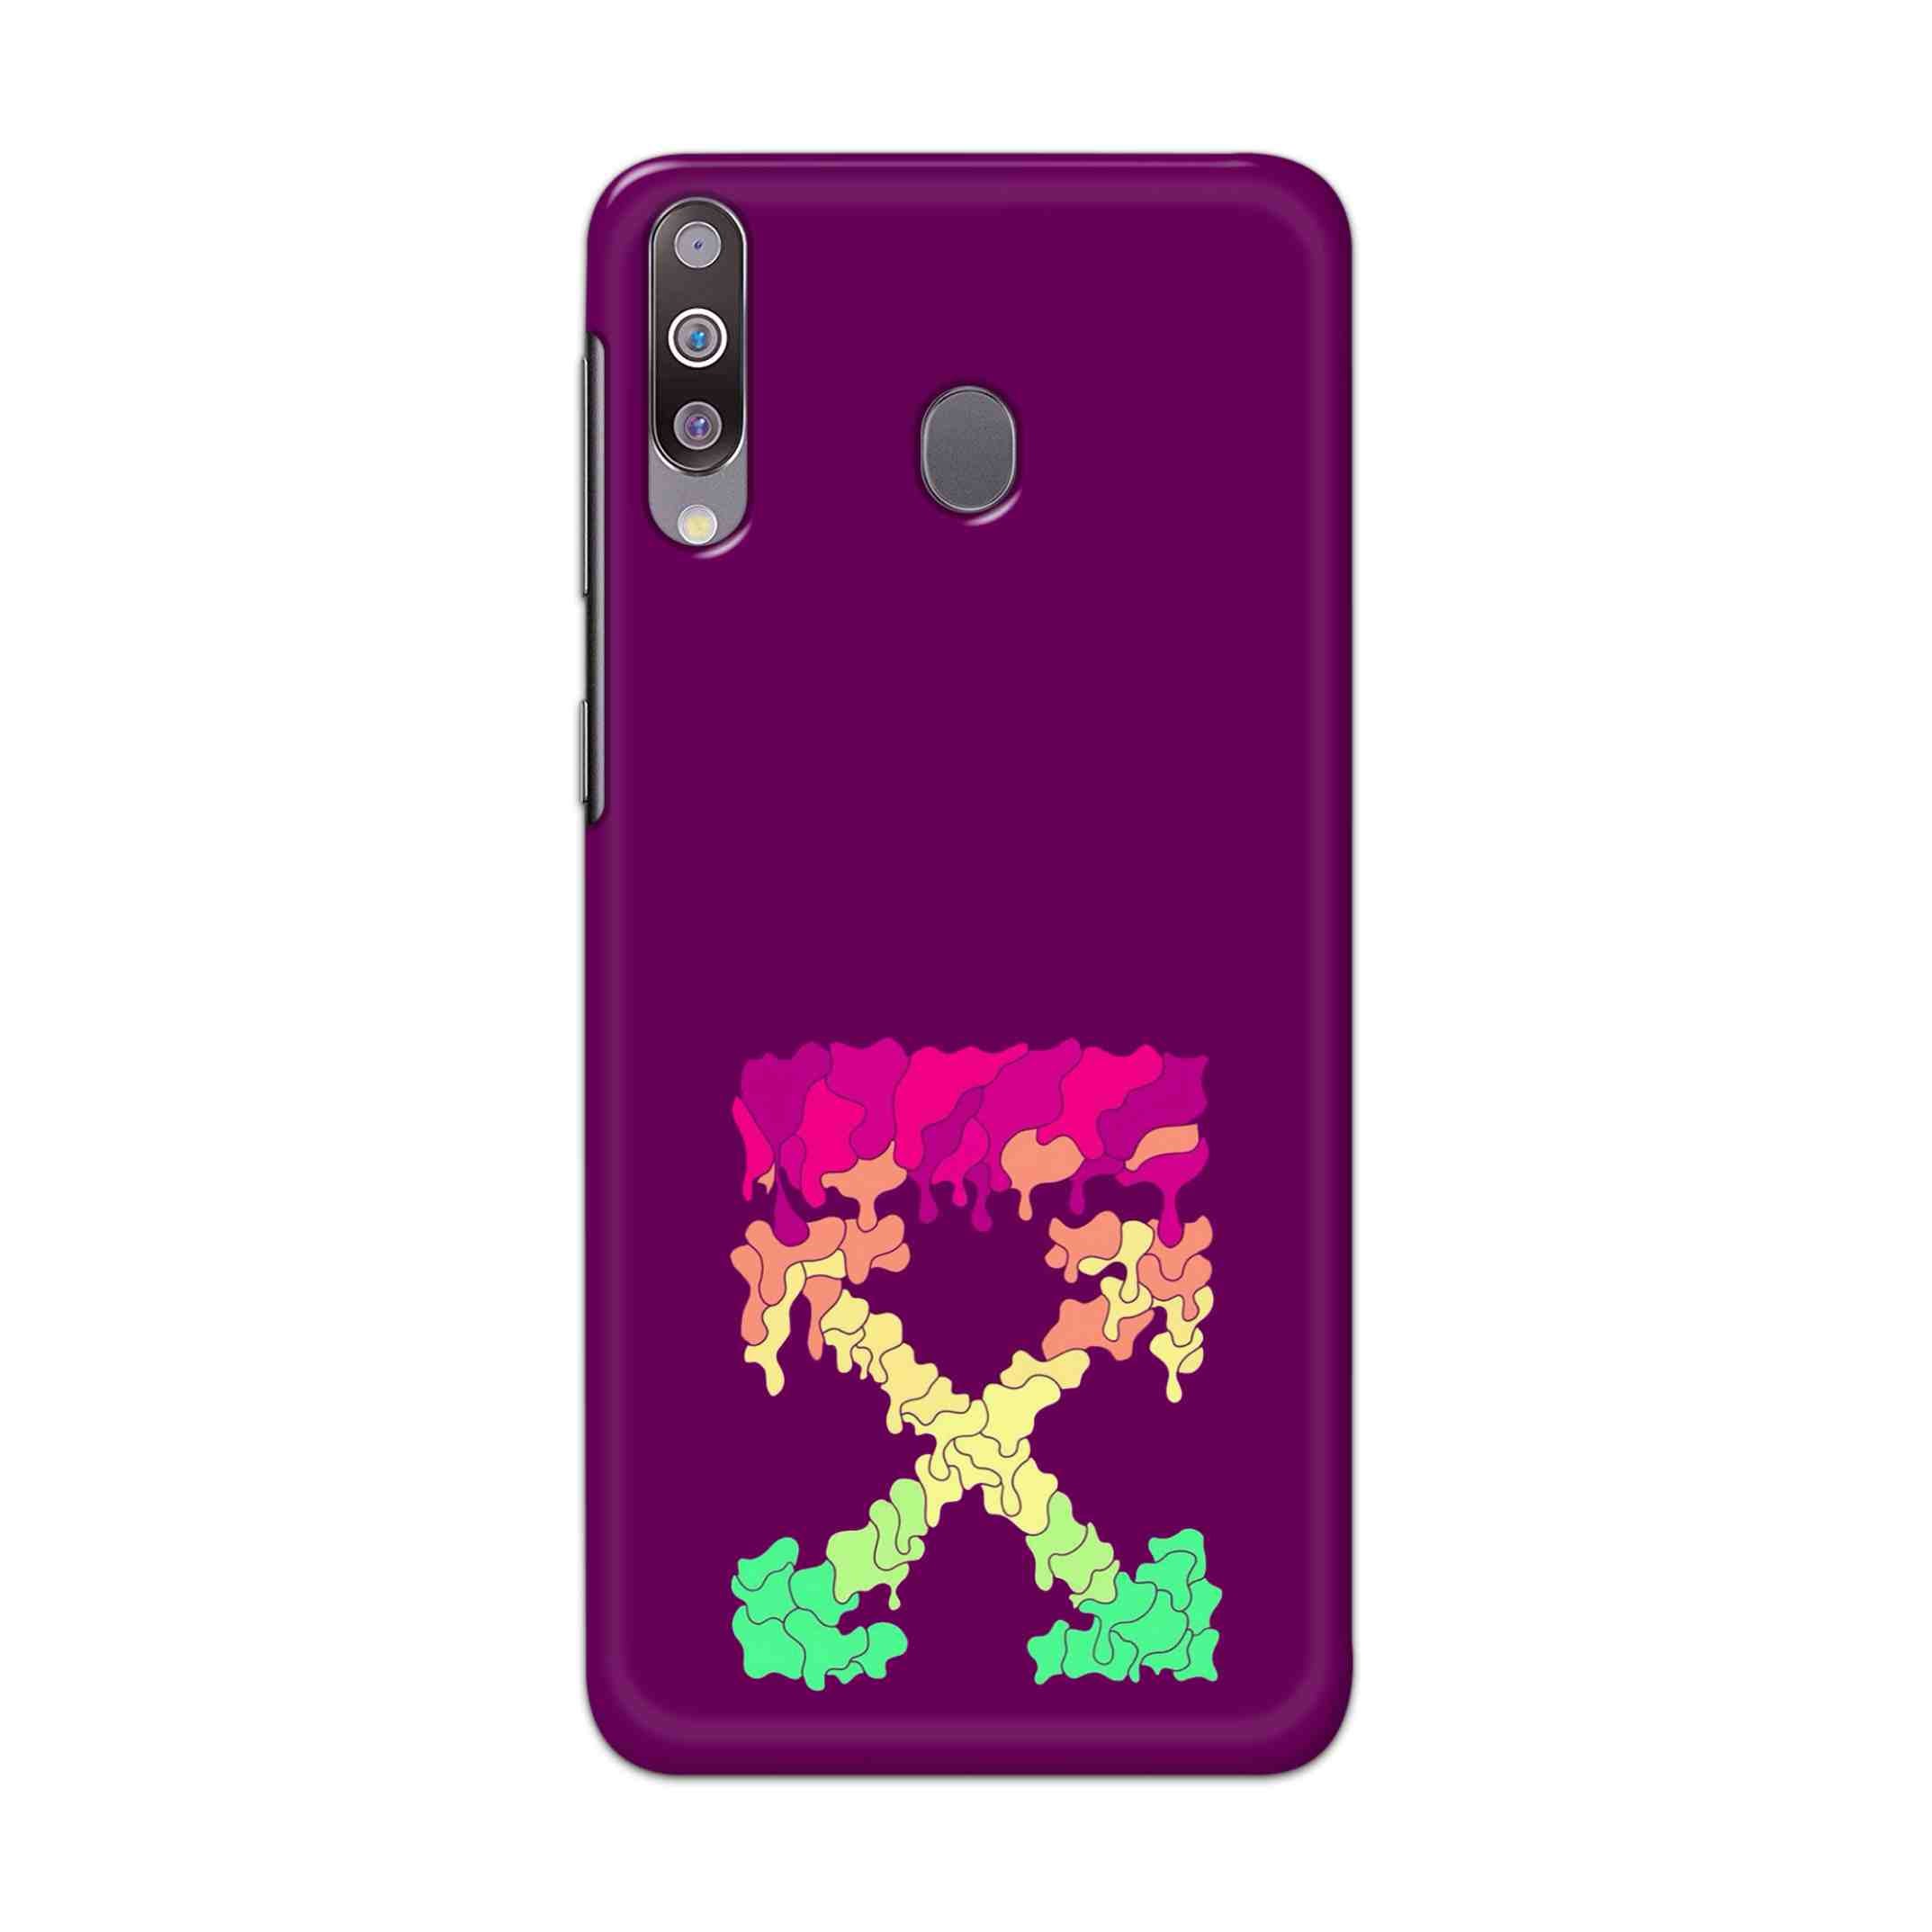 Buy X.O Hard Back Mobile Phone Case Cover For Samsung Galaxy M30 Online